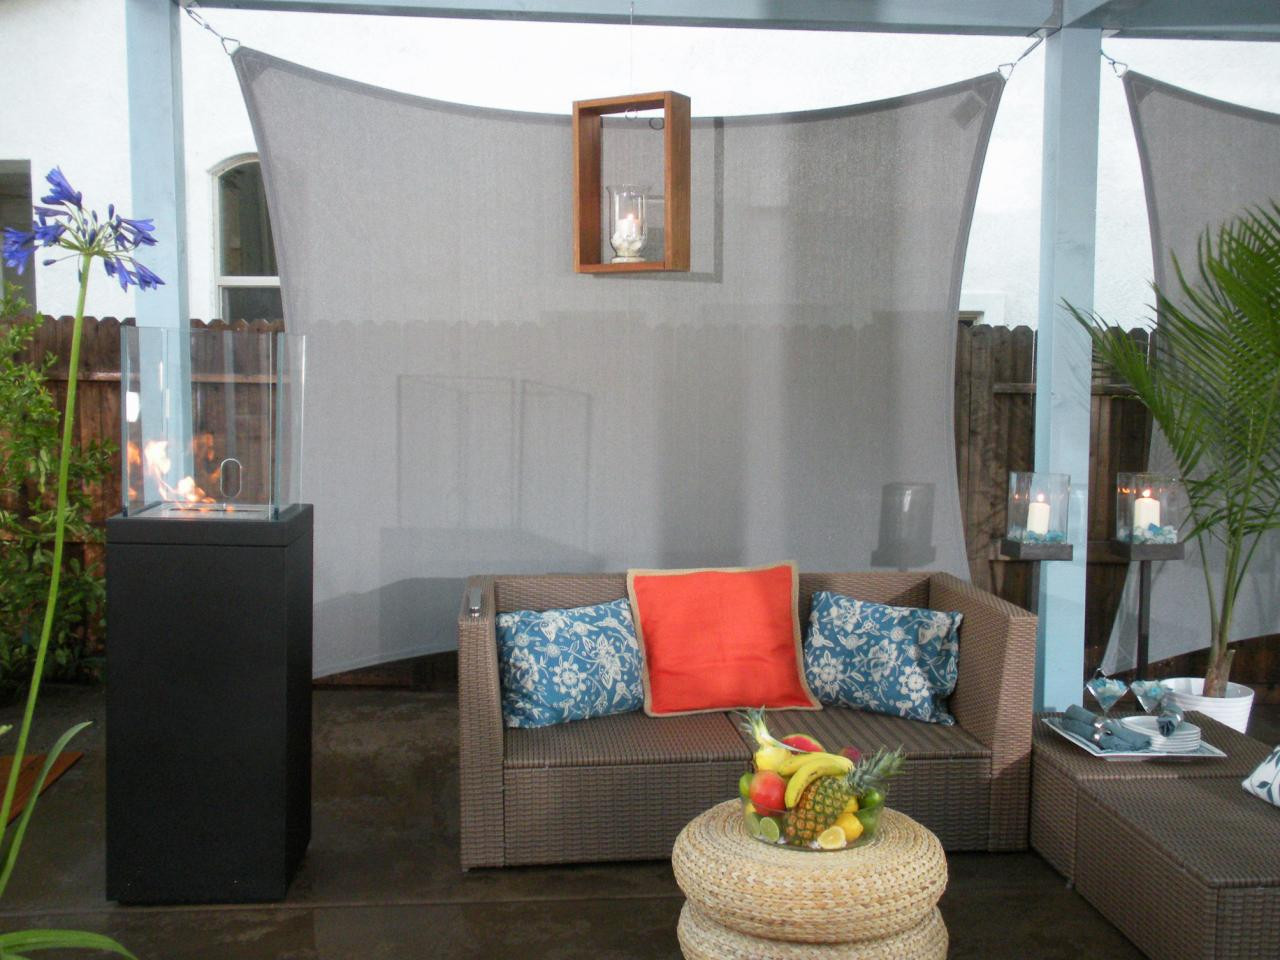 Backyard Sail Shade Ideas
 Easy Canopy Ideas to Add More Shade to Your Yard